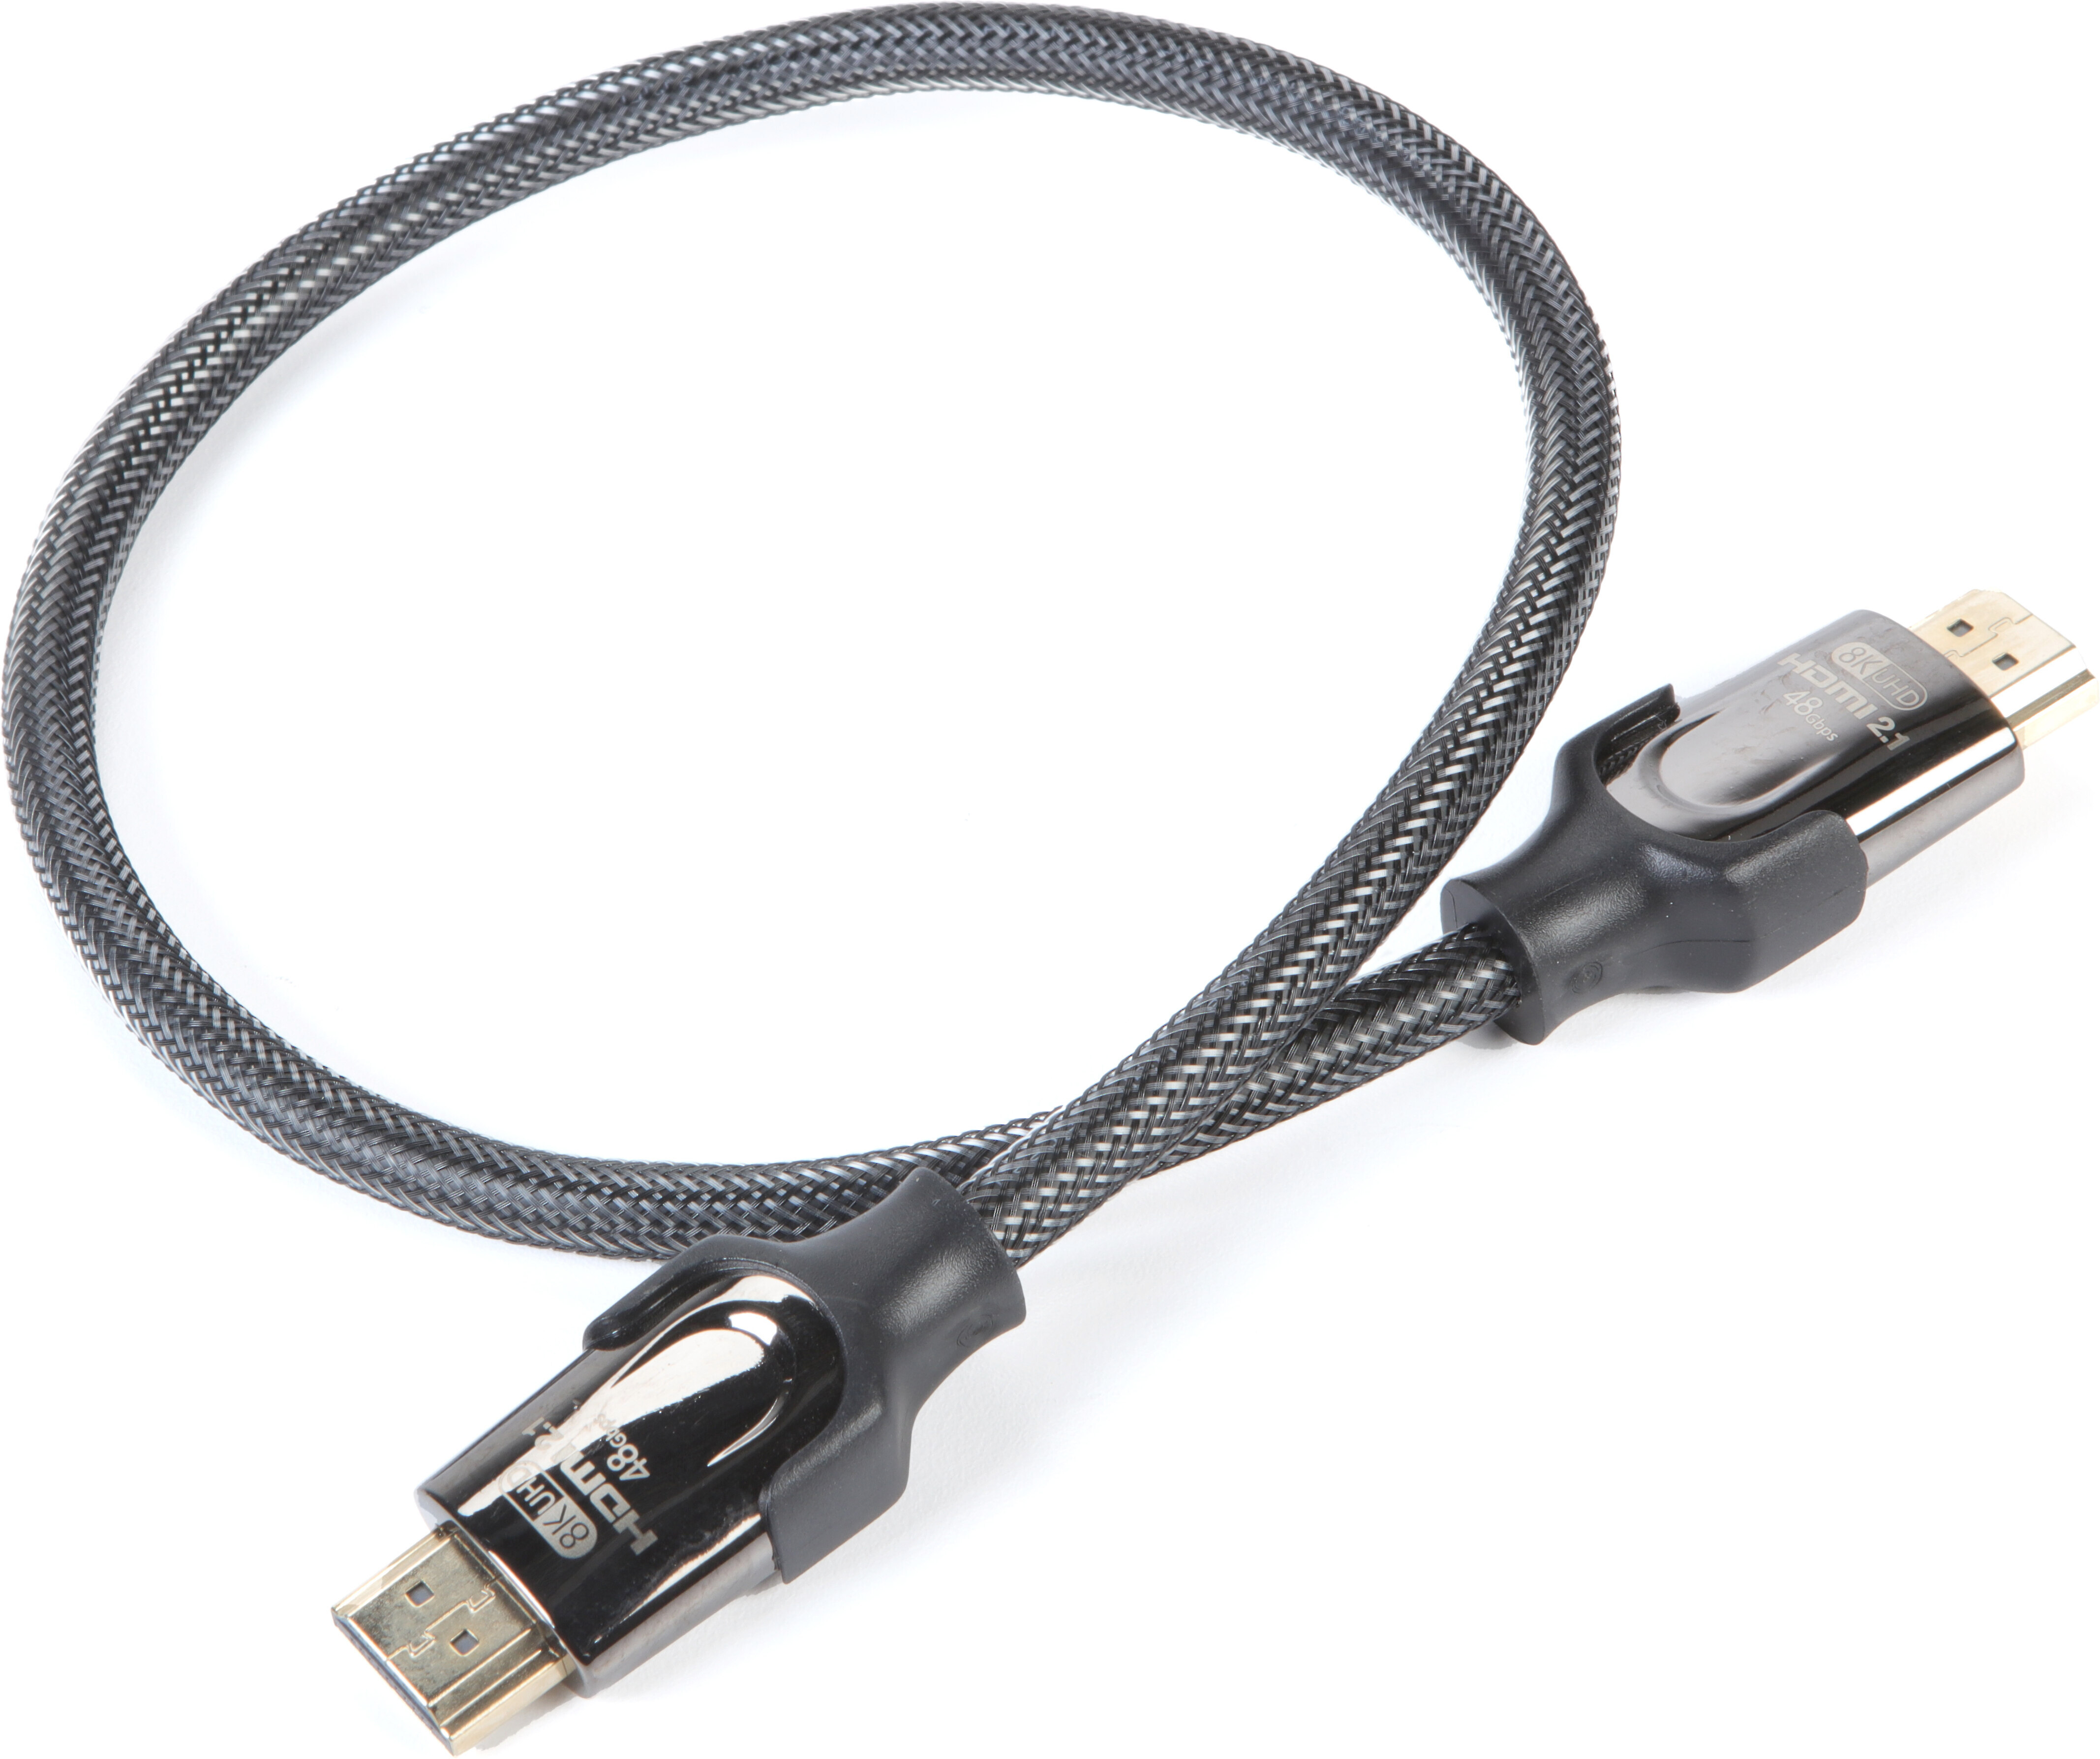 Cable Matters High Speed HDMI to Mini HDMI Cable 15 ft (Mini HDMI to HDMI)  4K Resolution Ready